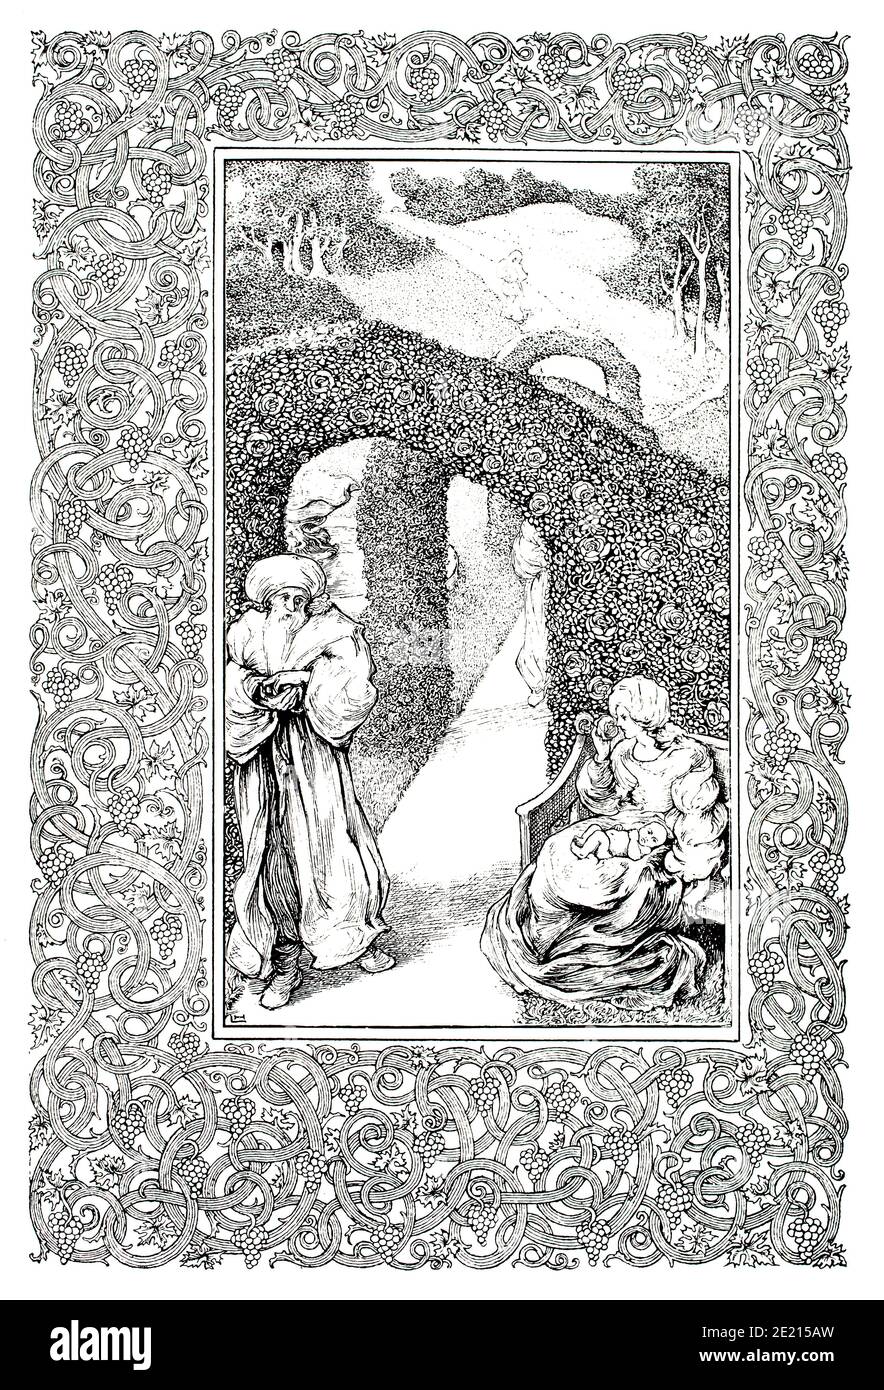 illustration by Laurence Housman from Green Arras, published by John Lane, in 1897 The Studio an Illustrated Magazine of Fine and Applied Art Stock Photo